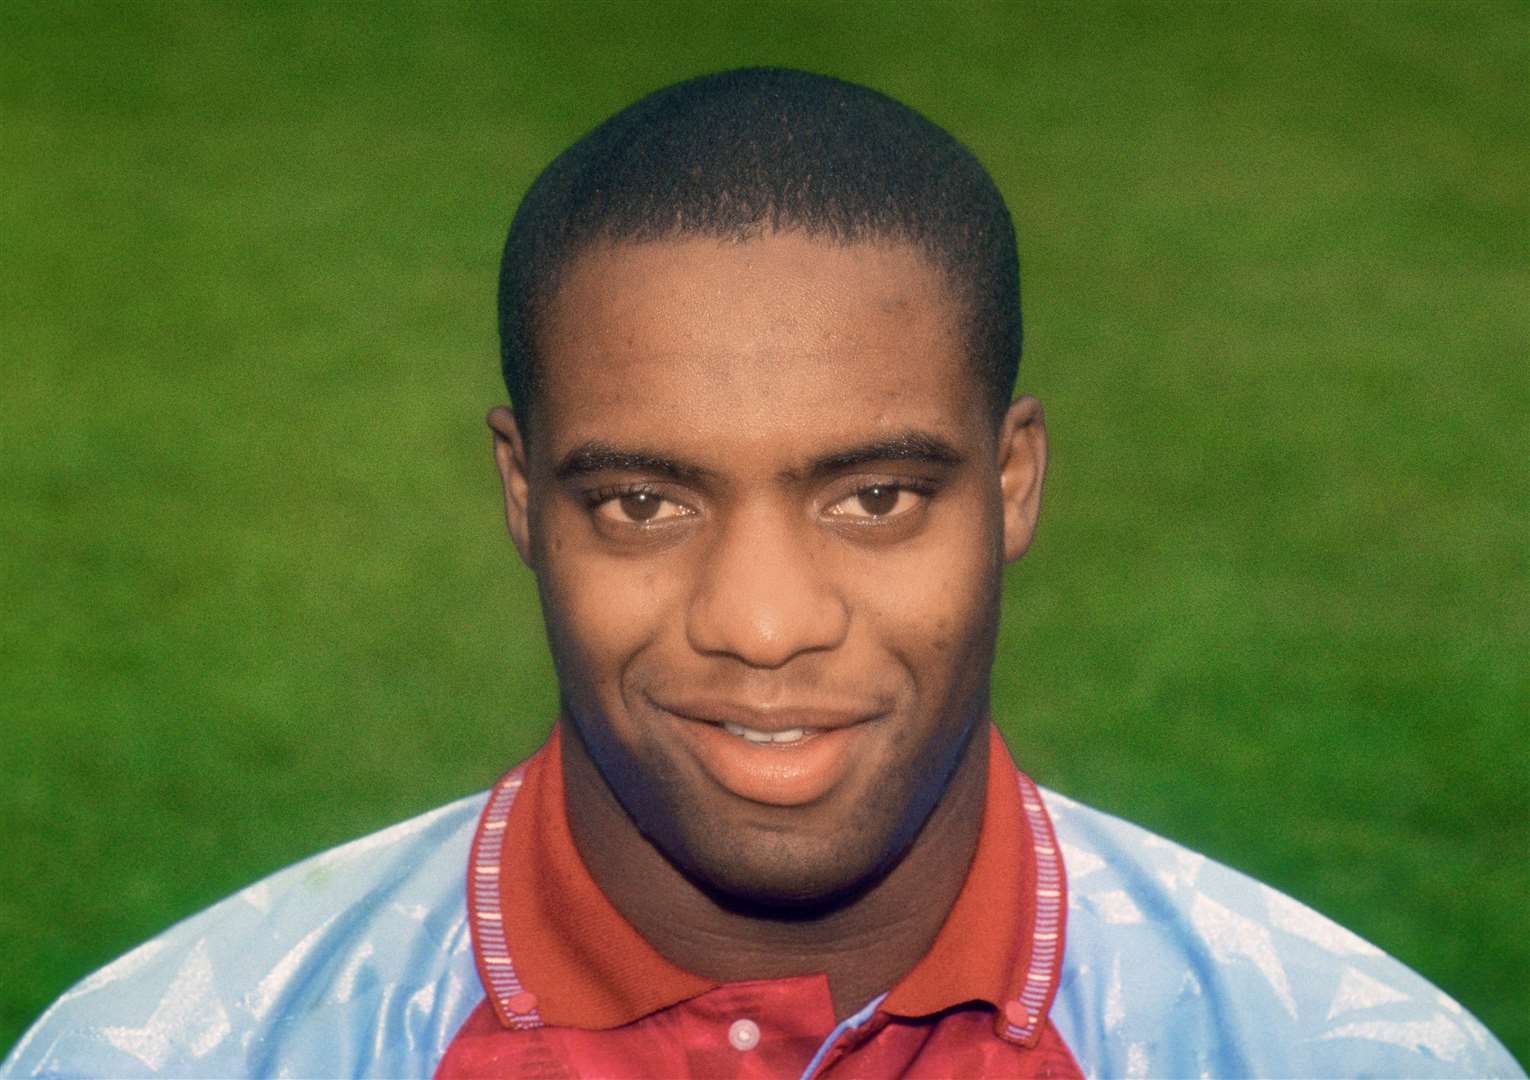 Dalian Atkinson pictured during his time at Aston Villa in the early 1990s (PA)